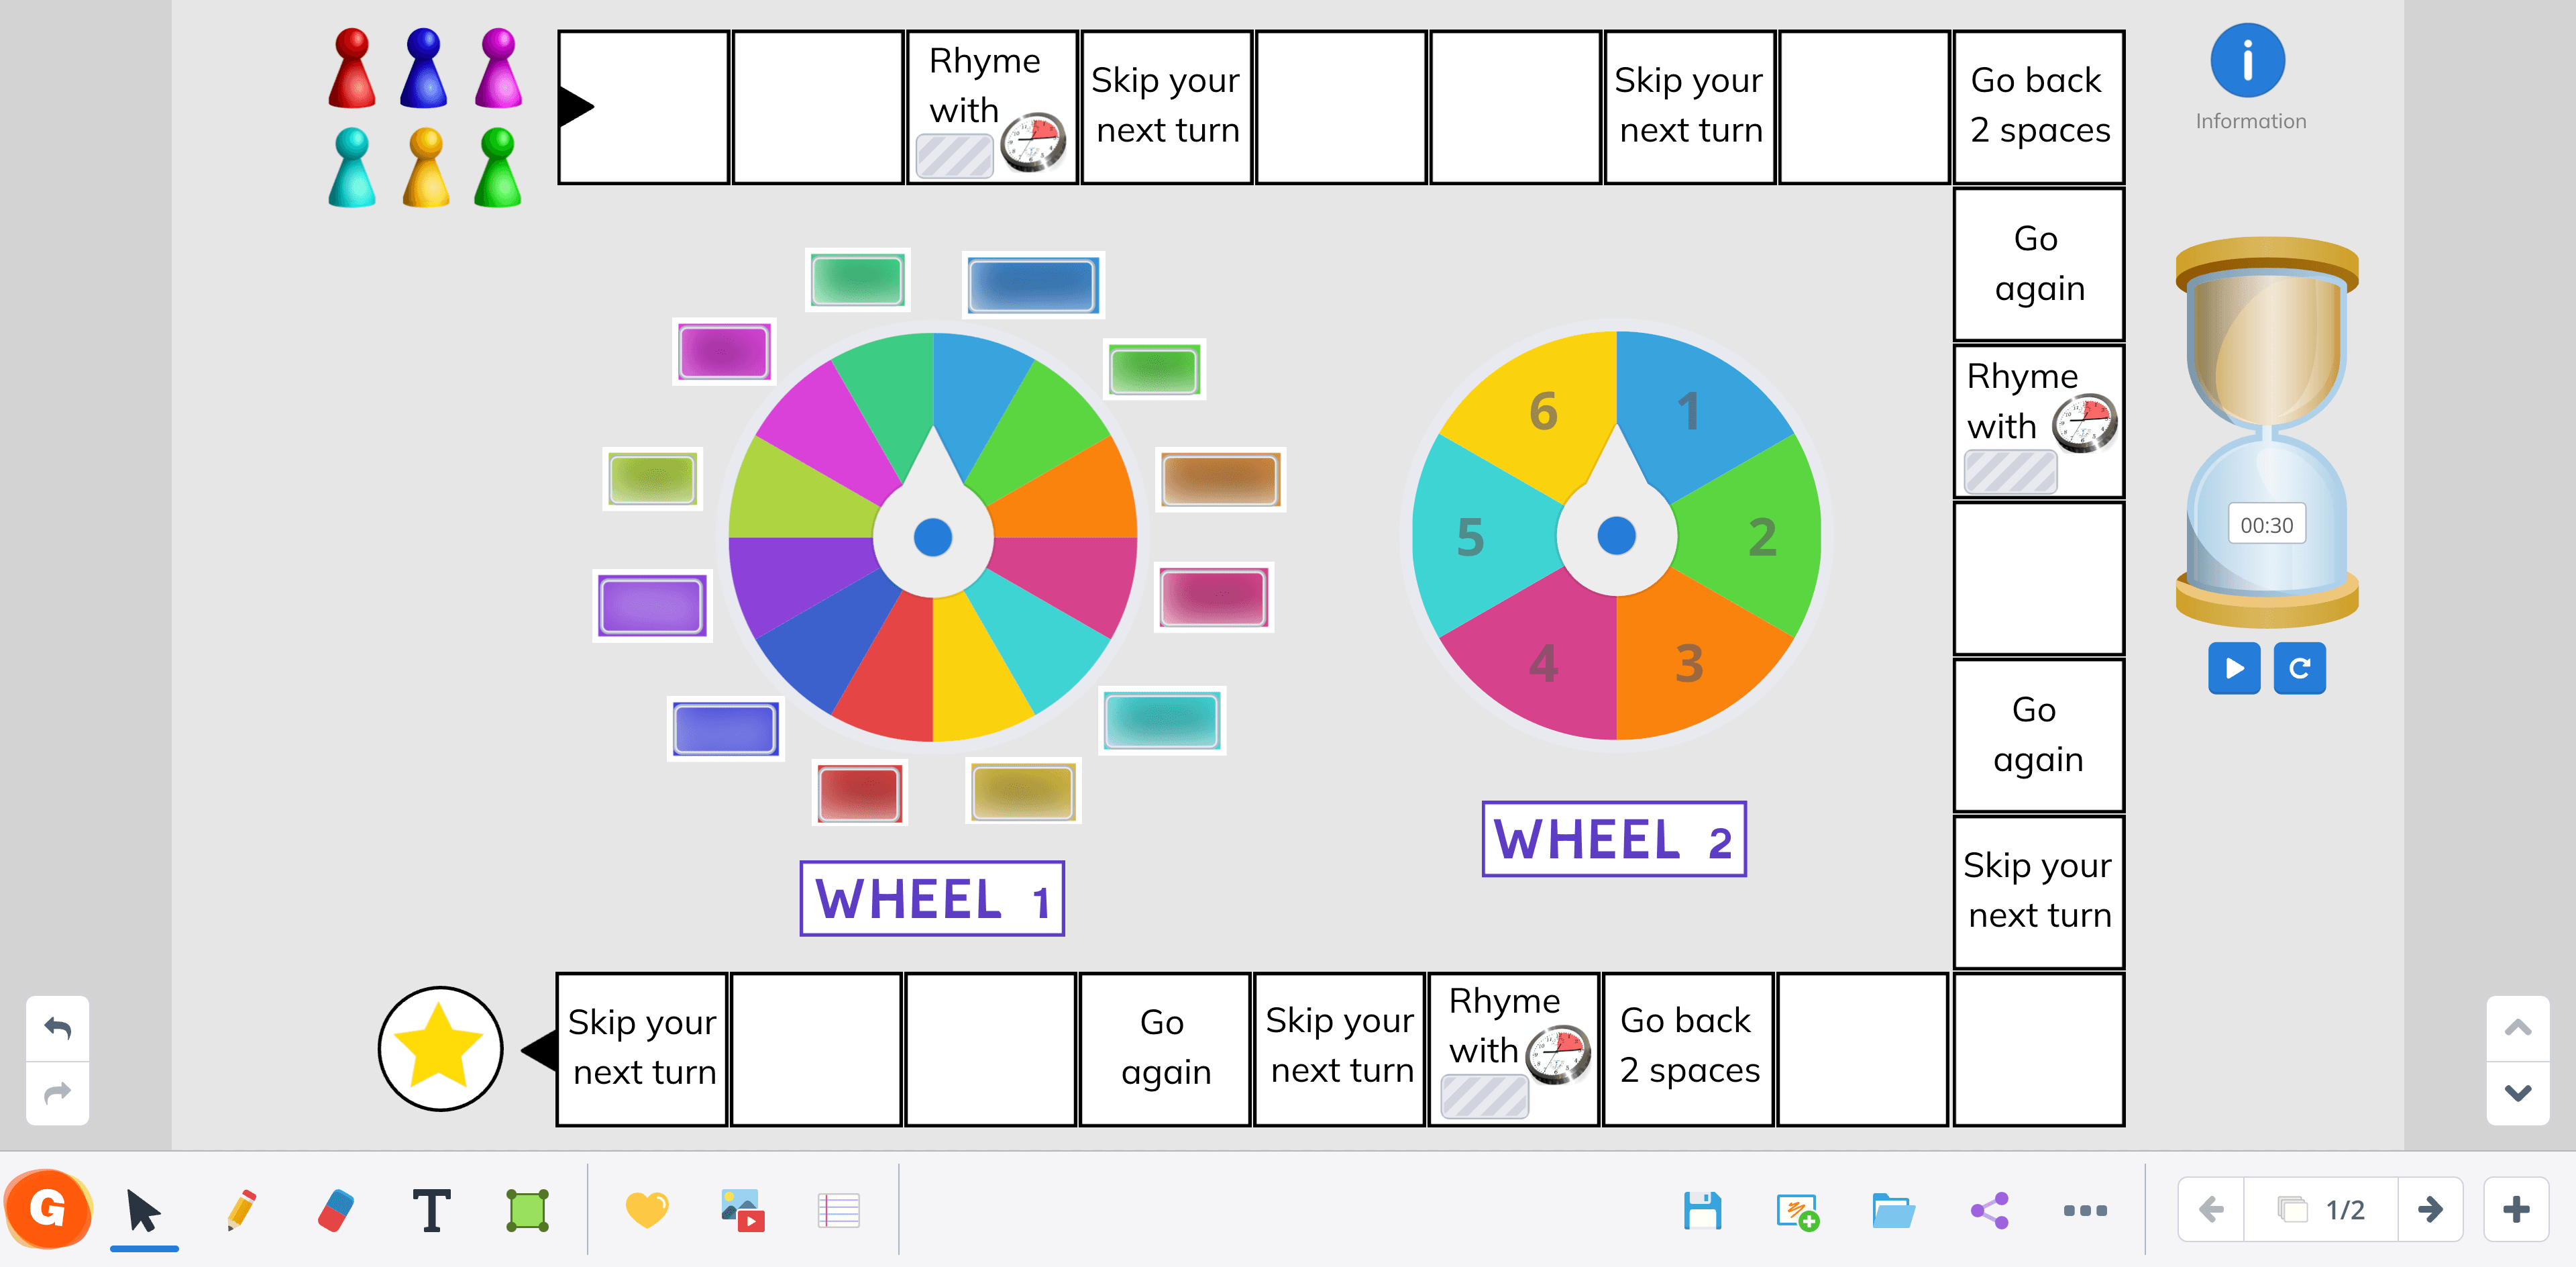 Example of a phonics learning game on an interactive whiteboard